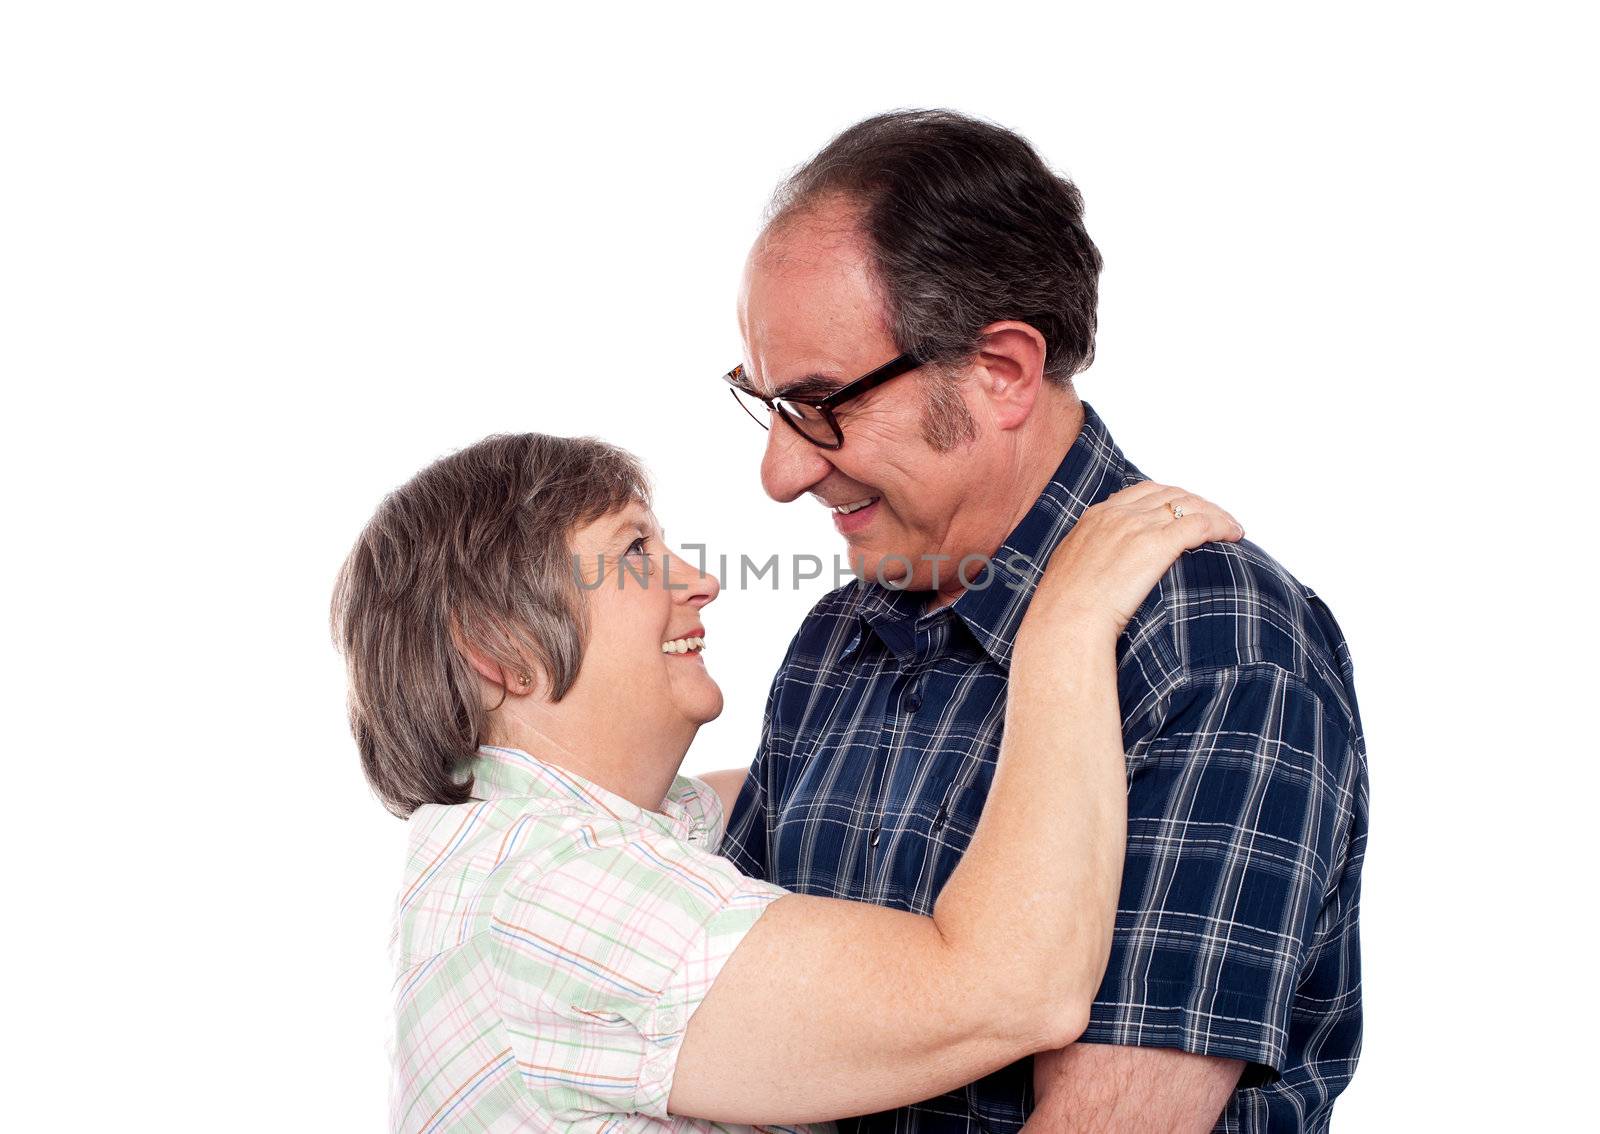 Aged couple in a romantic mood looking each other